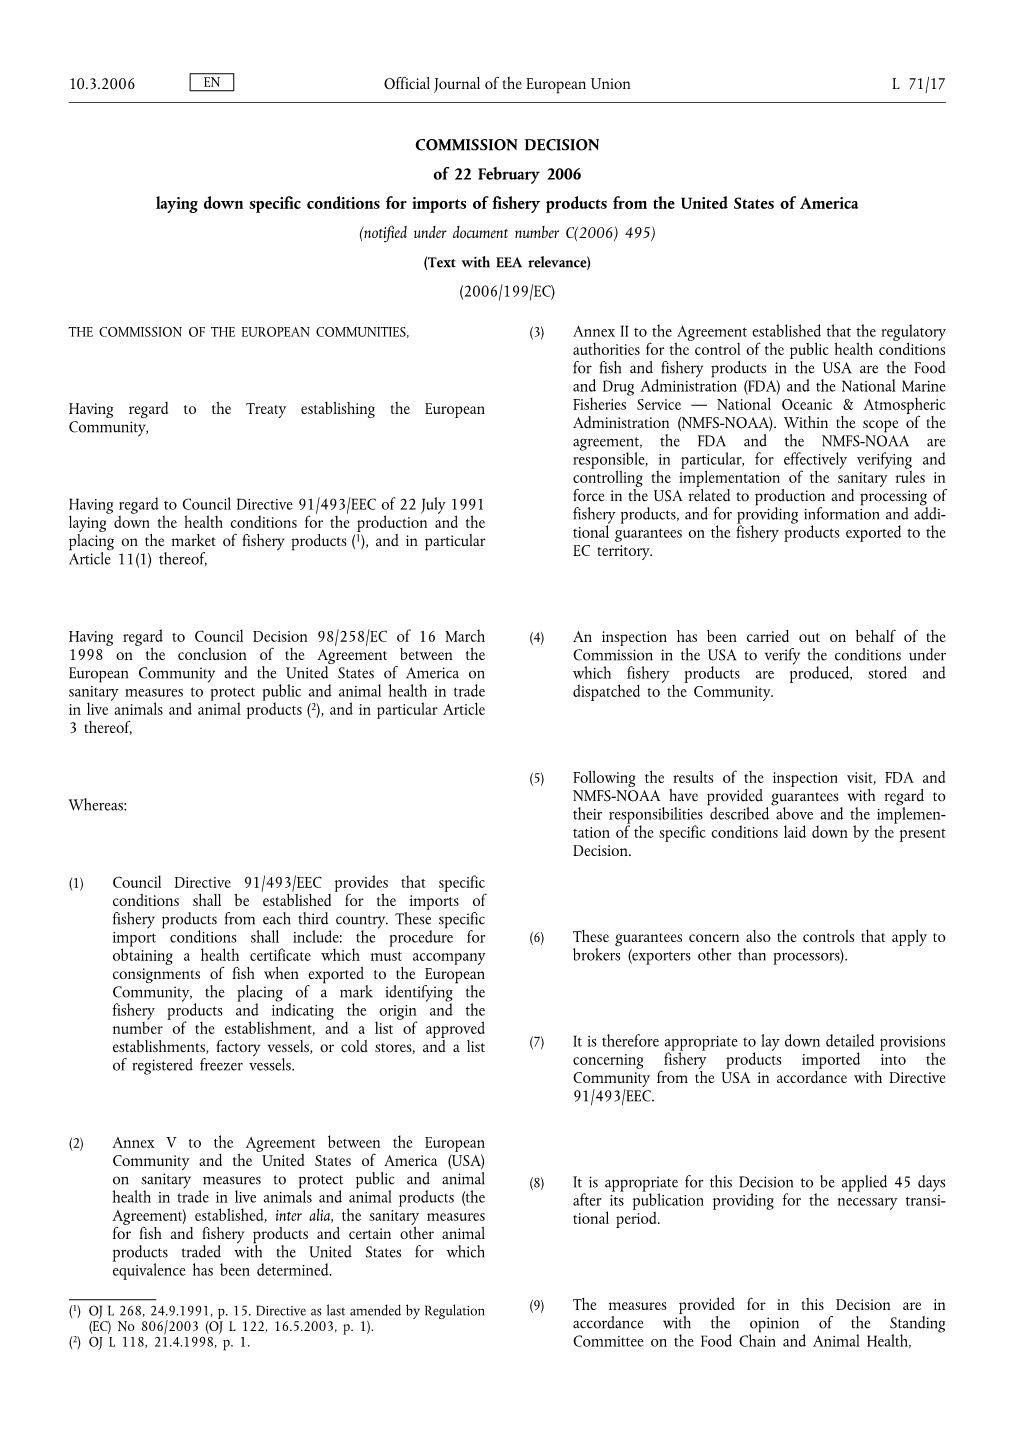 COMMISSION DECISION of 22 February 2006 Laying Down Specific